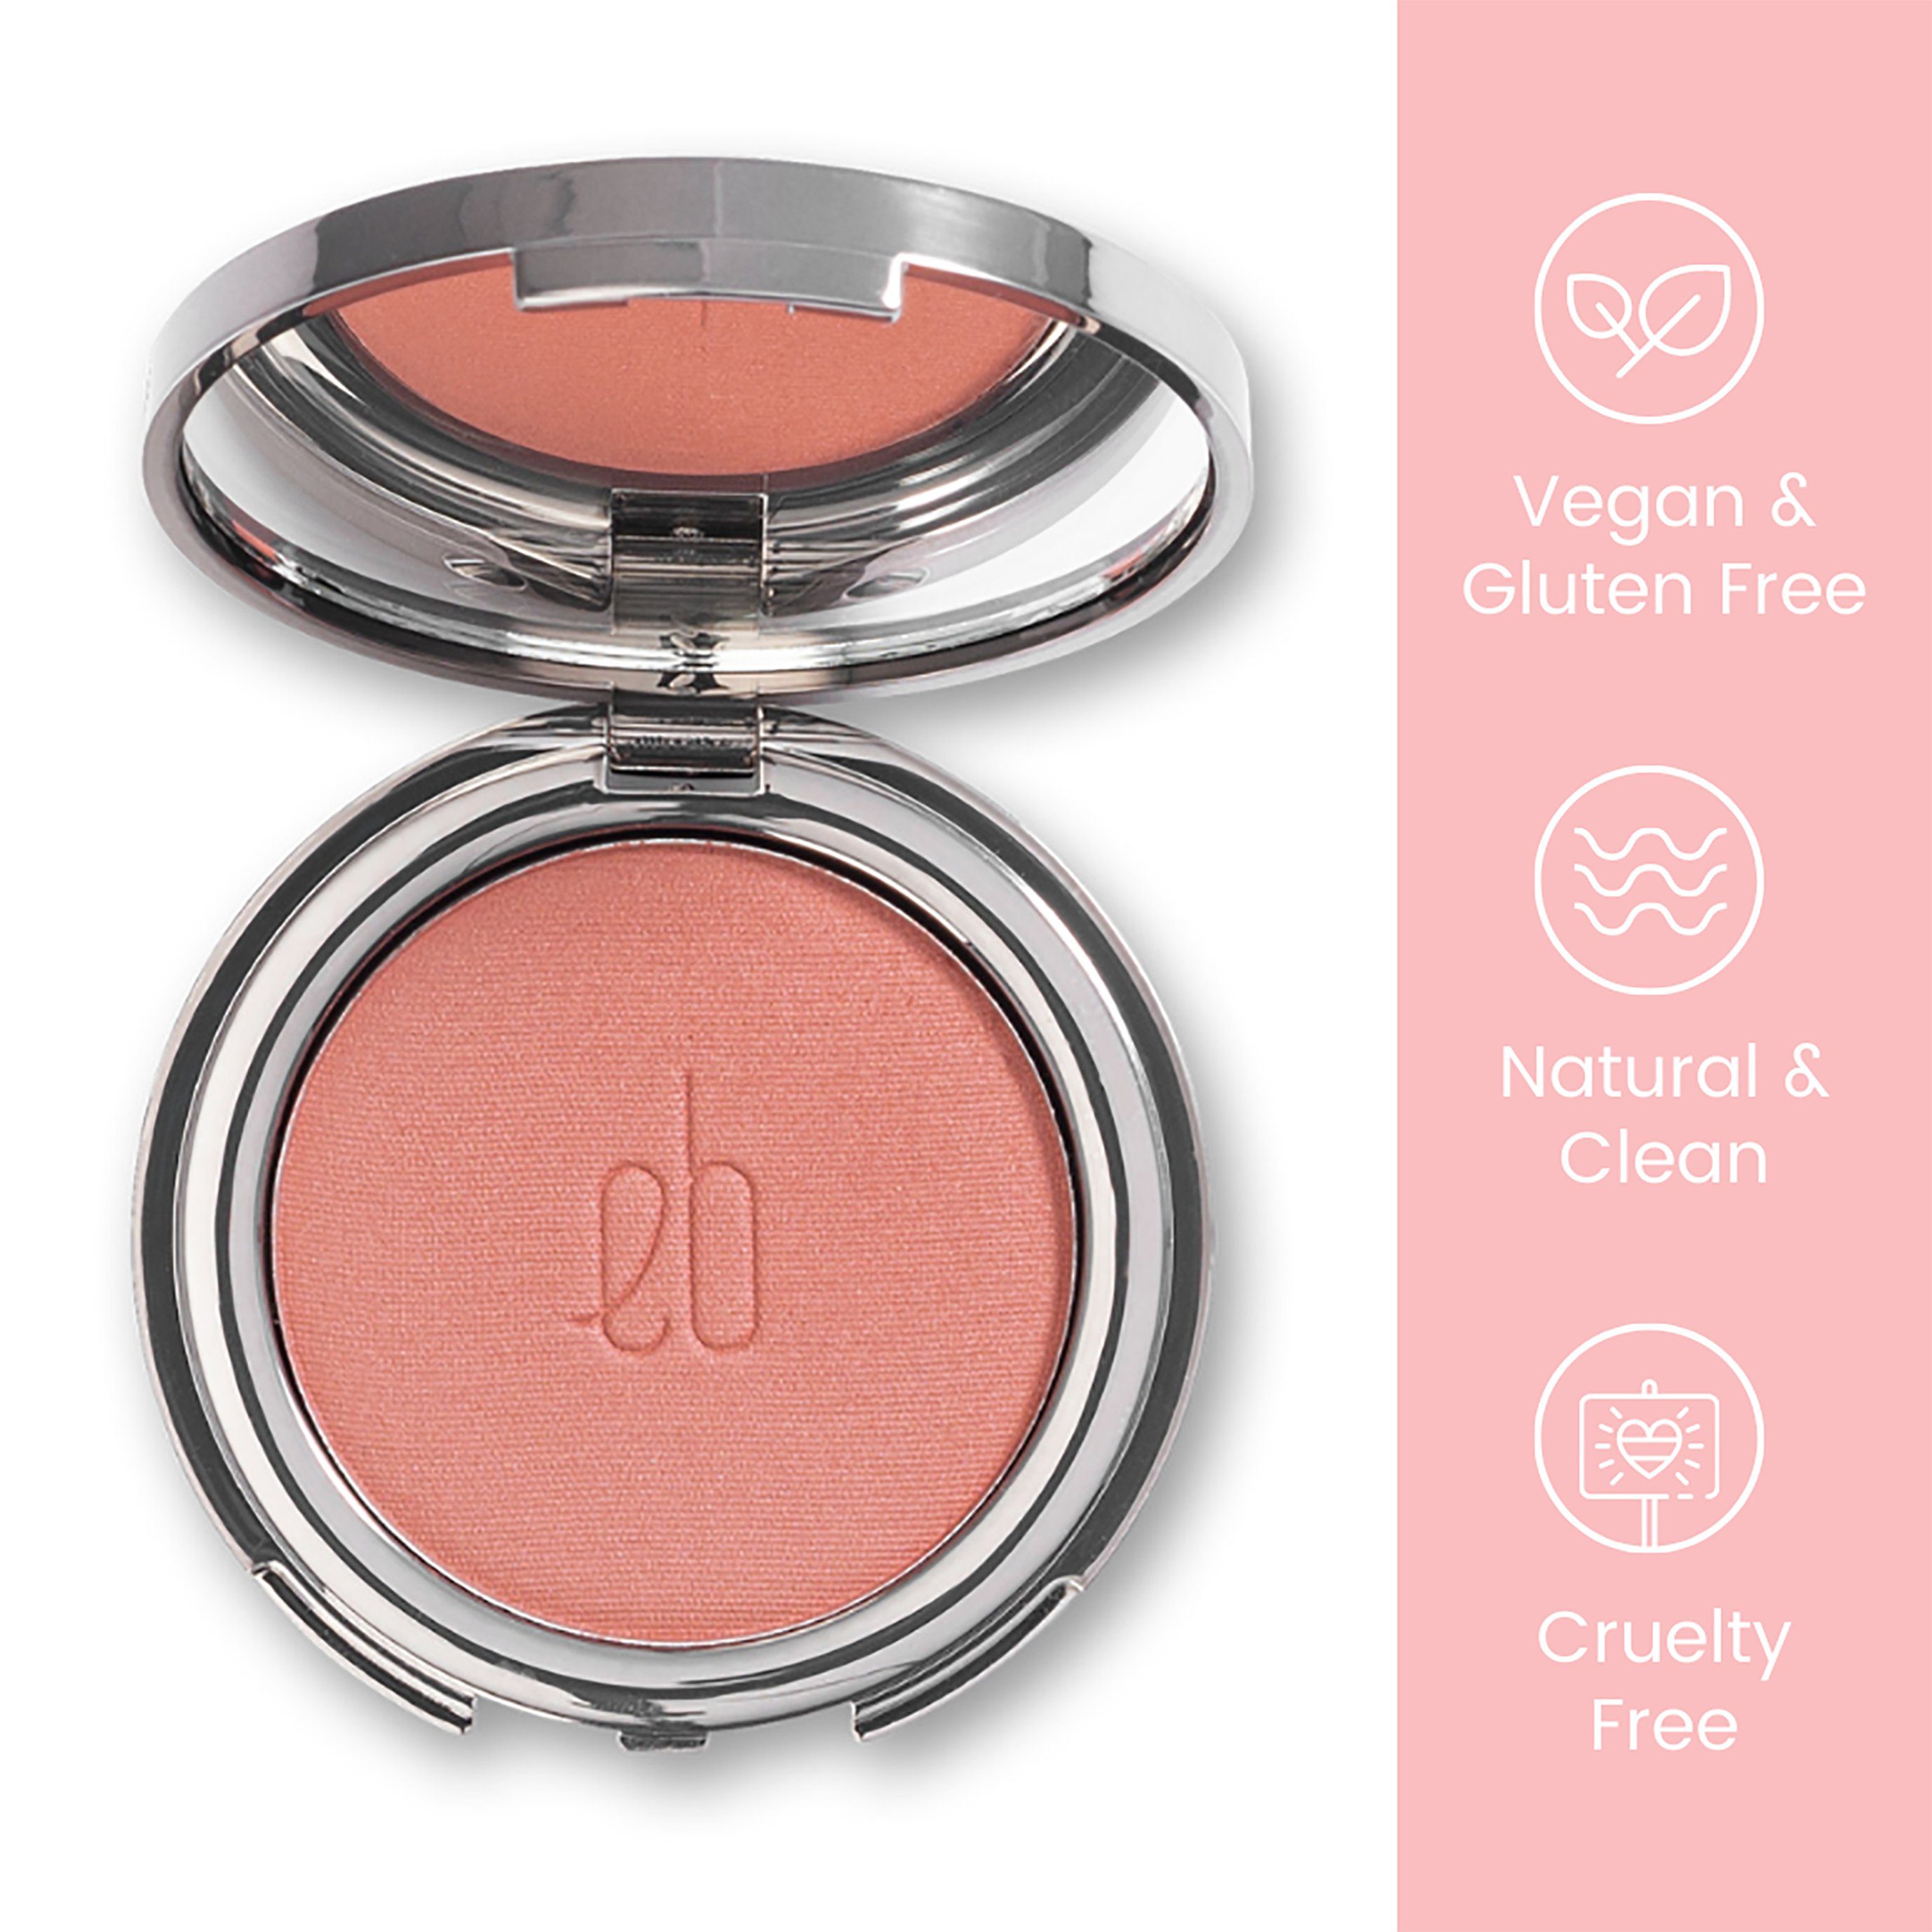 Rouge, frei, Rouge-Palette Blush, Gluten Mineral Veil Rose Natural, Mineral Vegan, Veil Clean, ETHEREAL BEAUTY® Langhaltend